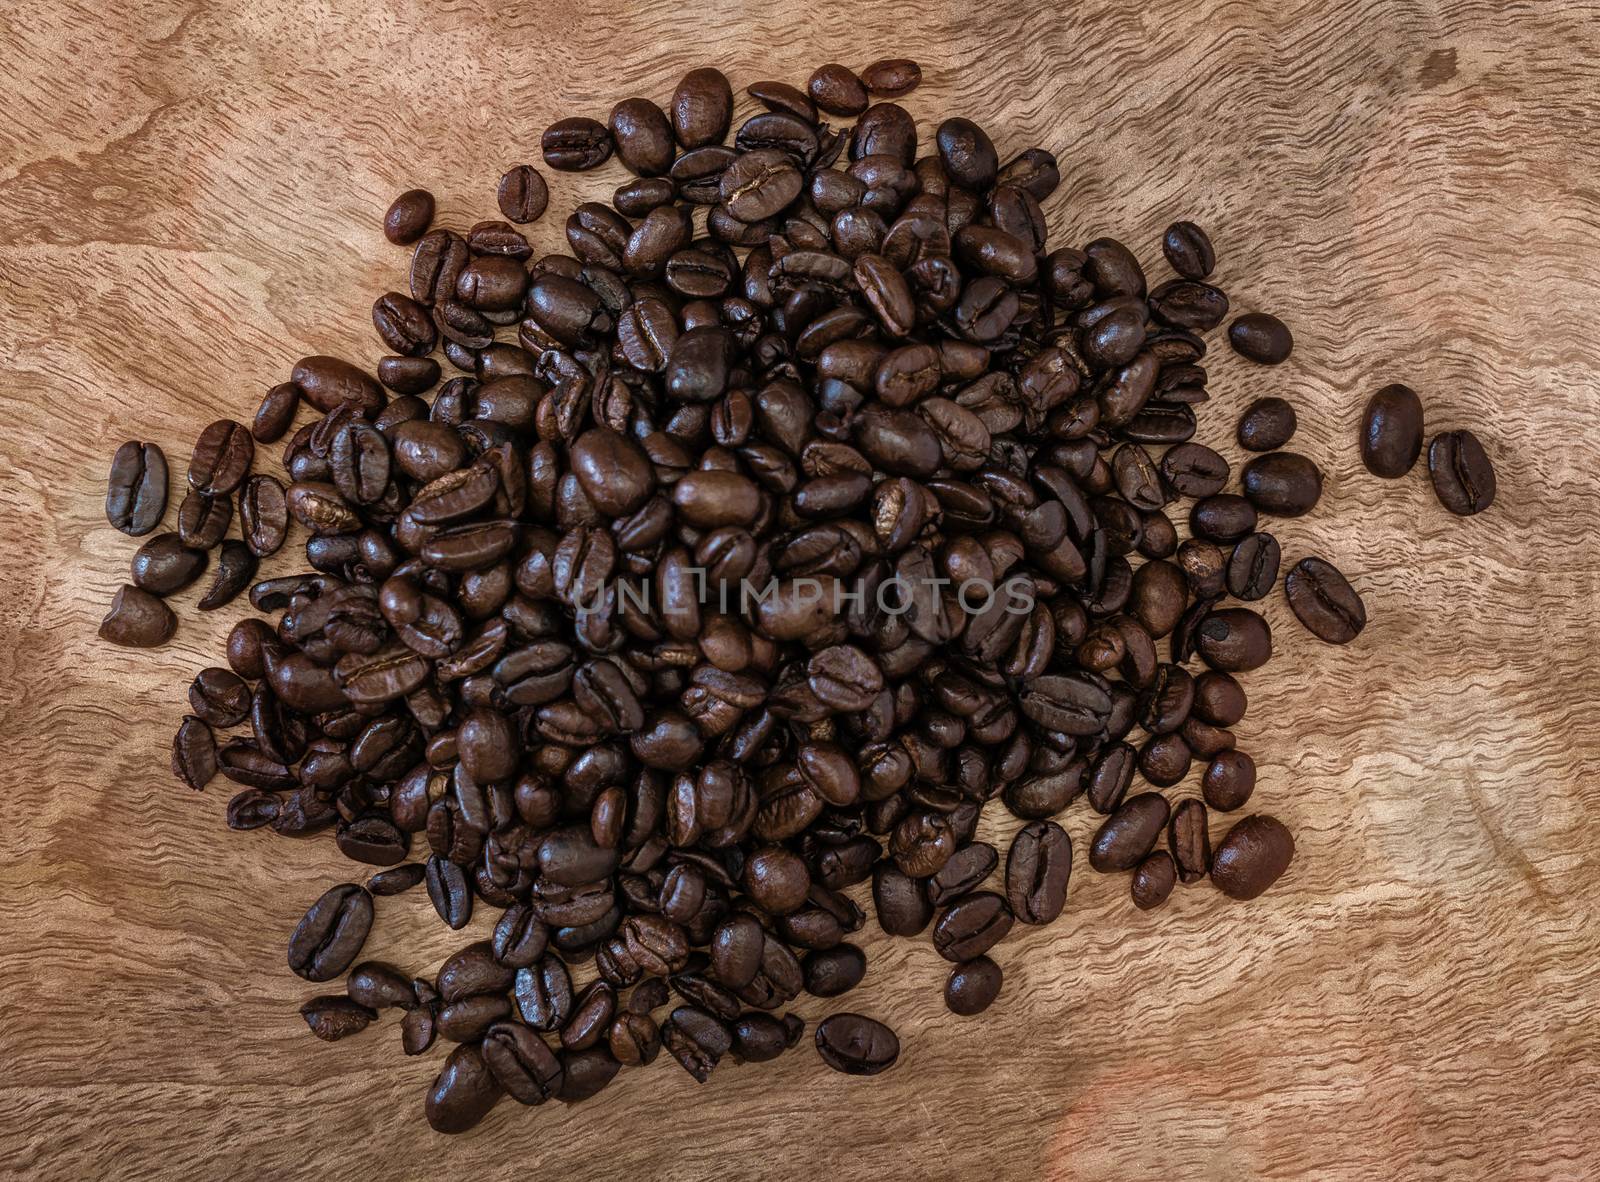 Group of roasted coffee beans on a wooden surface